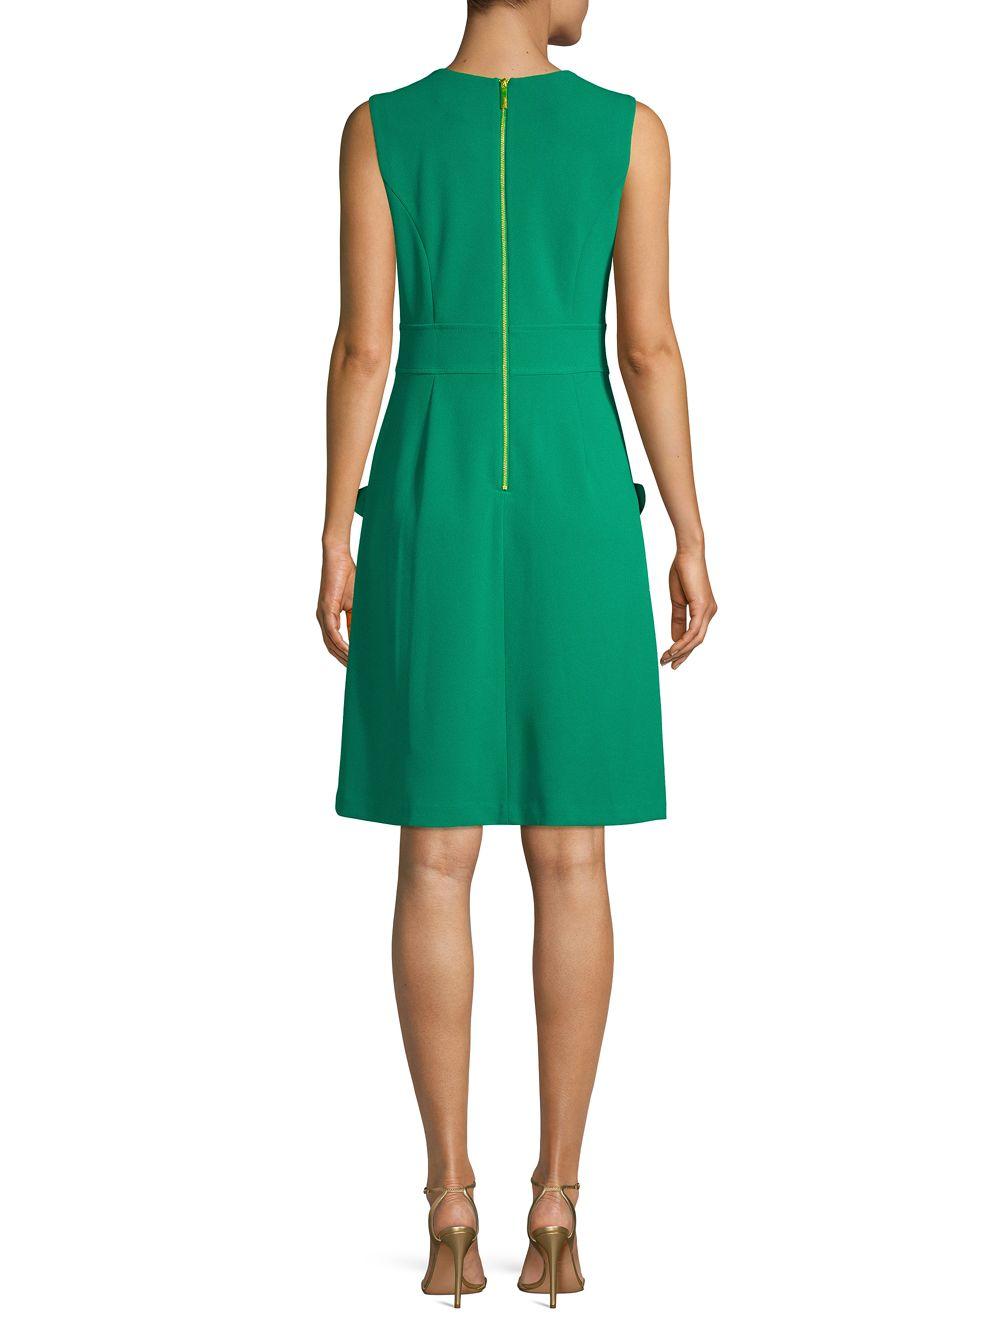 CALVIN KLEIN 205W39NYC Synthetic Ruffle Sleeveless A-line Dress in ...